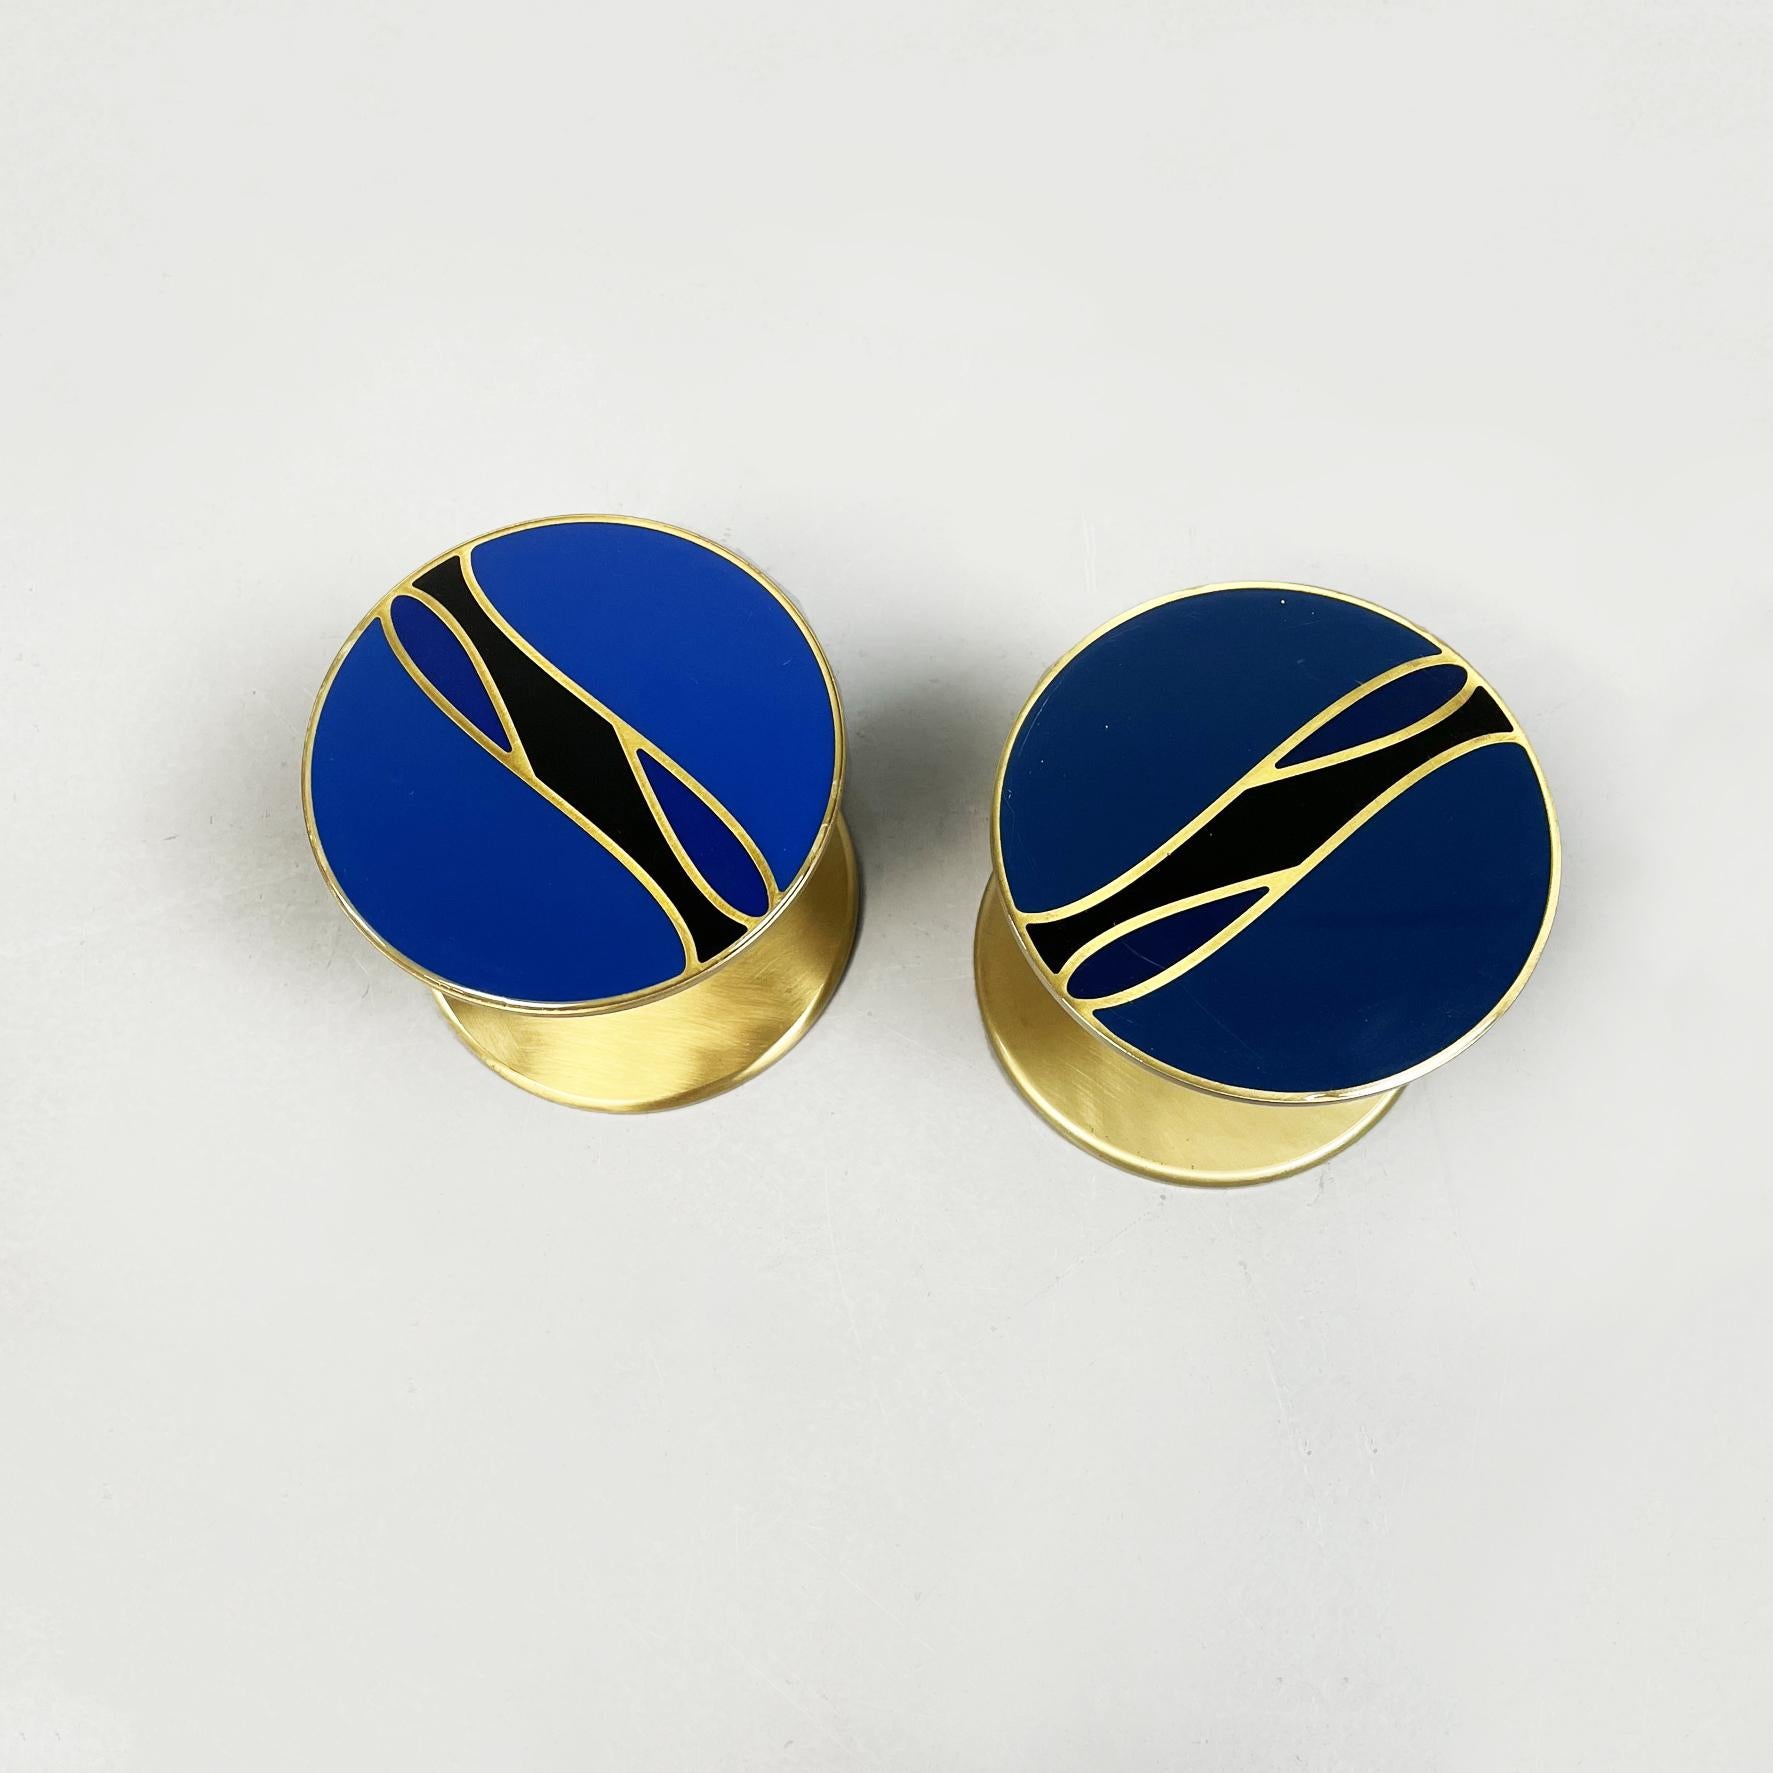 Italian mid-century metal and brass decorated handles by Reggiani, 1970s
Pair of round handles in brass and metal. On both sides of the door pulls there are blue and black decorations covered with thin glass underneath.
Designed by Goffredo